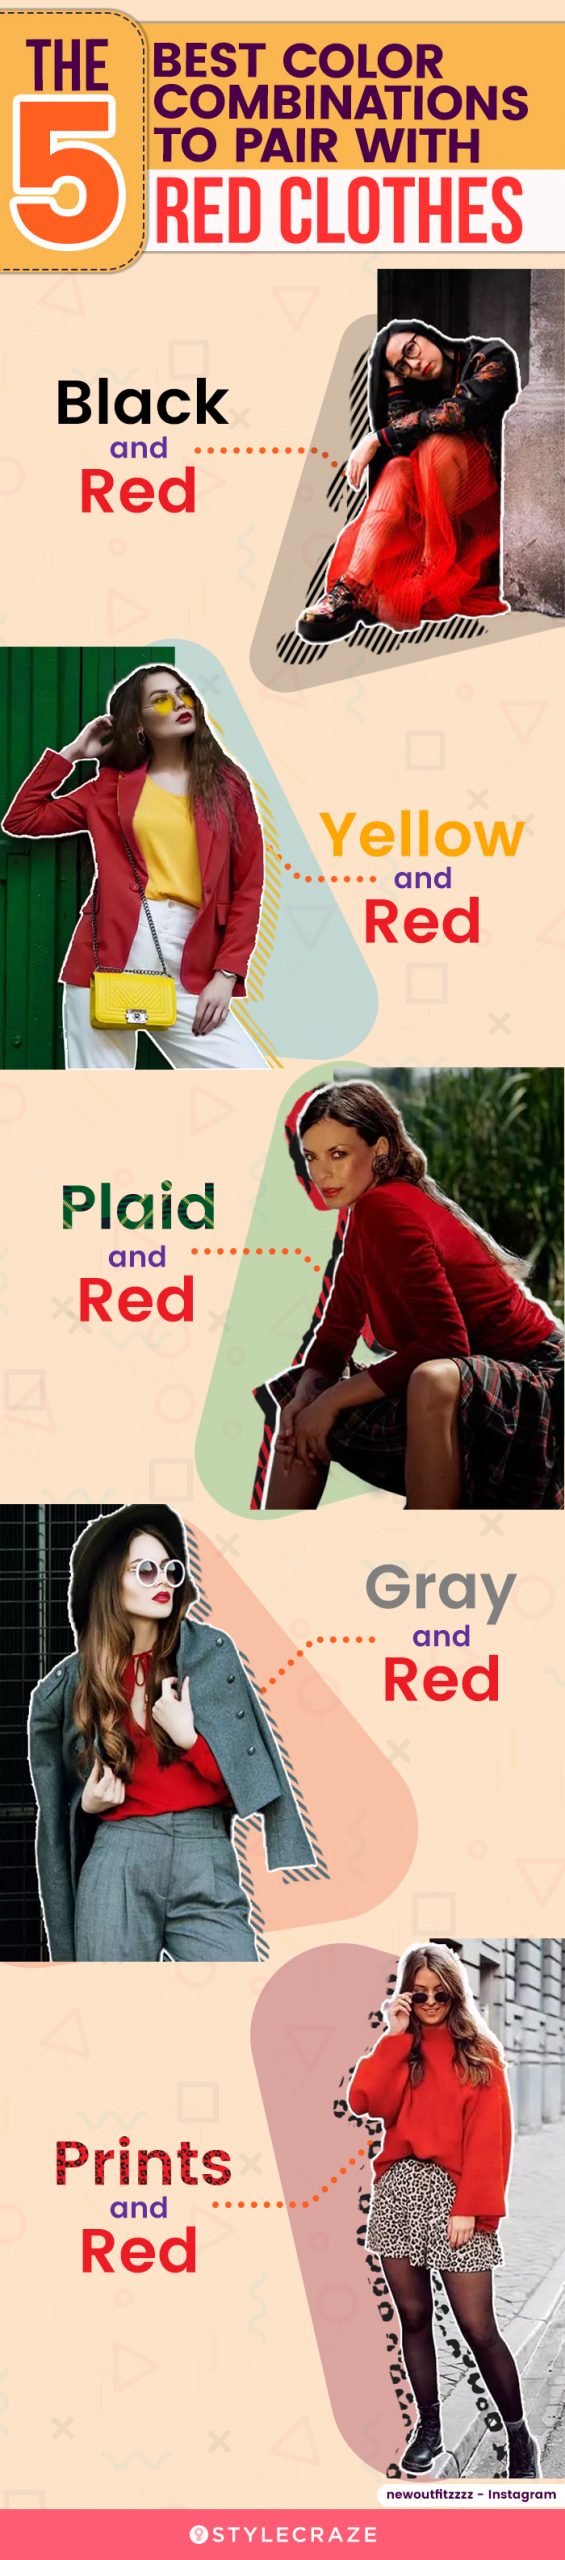 the 5 best color combinations to pair with red clothes (infographic)